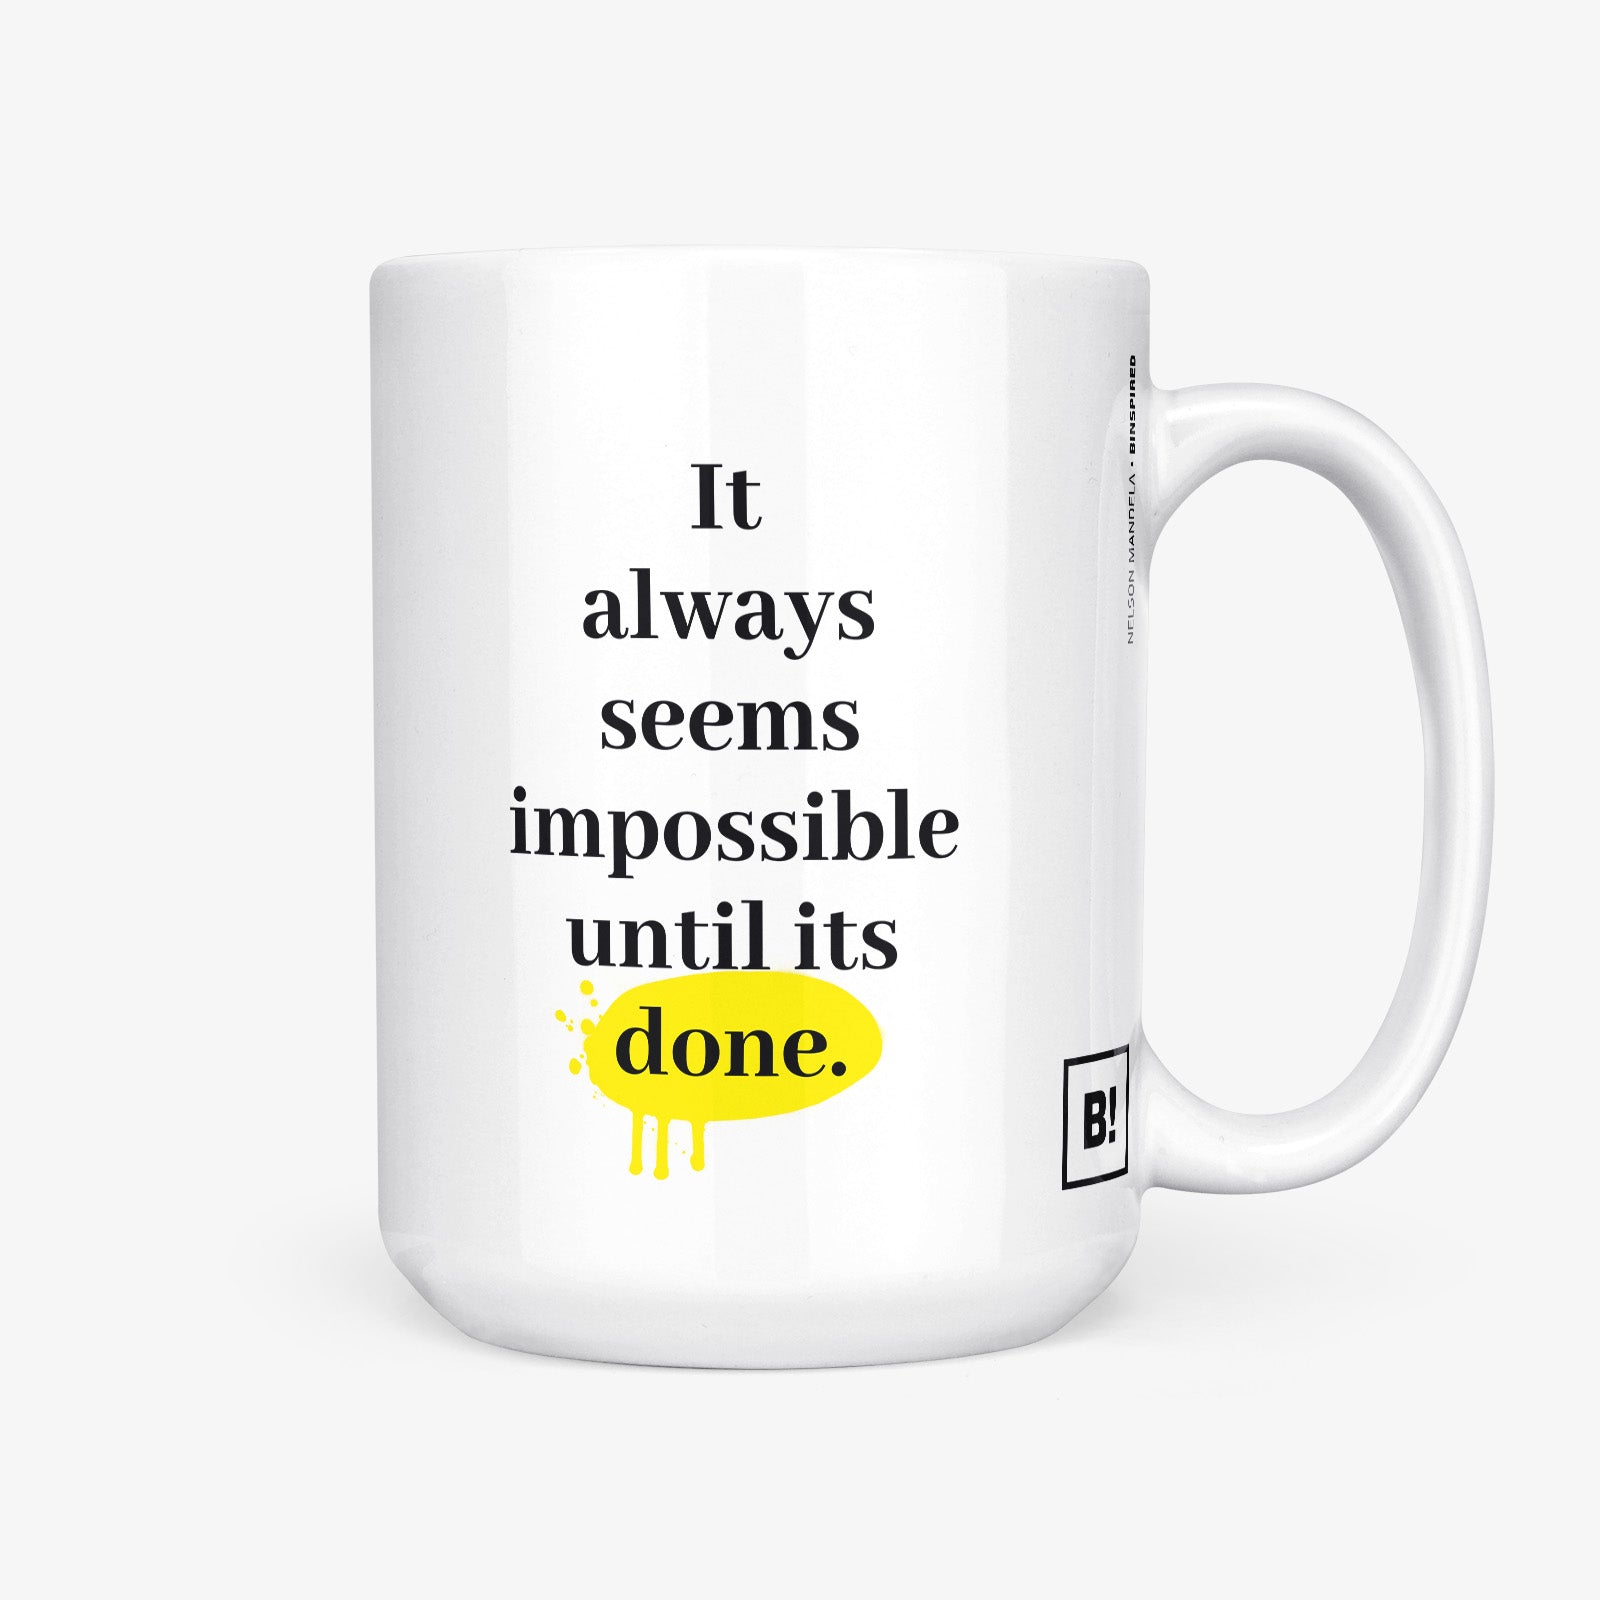 Be inspired by Nelson Mandela's famous quote, "It always seems impossible until it's done" on this white and glossy 15oz coffee mug with the handle on the right.